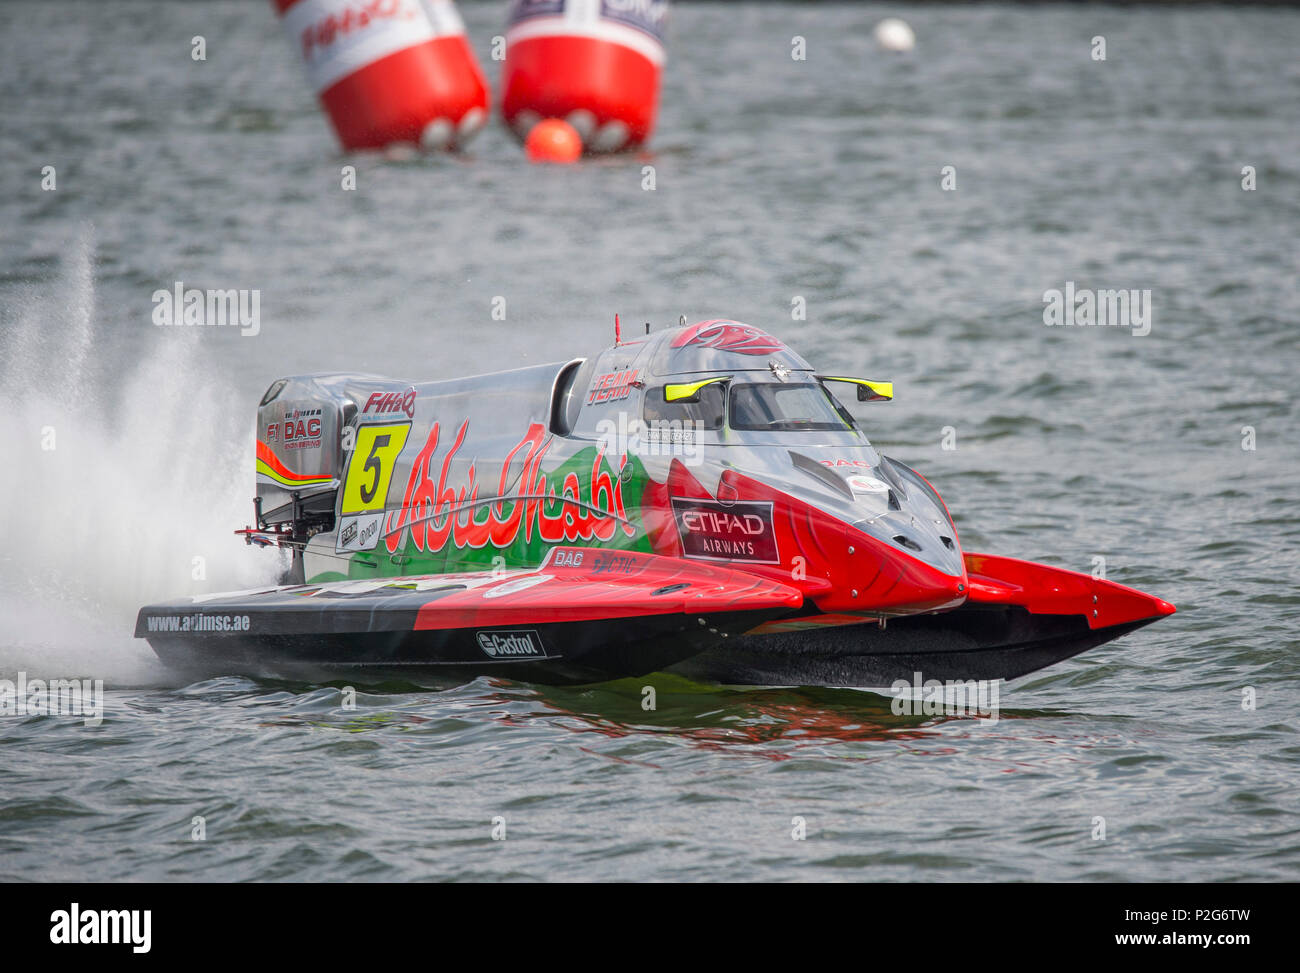 Royal Victoria Dock, London, UK. 15 June, 2018. The Grand Prix of London, part of London Tech Week. London hosts the UIM F1H2O World Championship powerboat race for the first time in 33 years, the weekend begins with practice session on the 1720 metre circuit. Qualifications take place on 16 June with the Grand Prix race on 17 June with boats reaching speed of 140mph on the straights with turns at 90mph. Credit: Malcolm Park/Alamy Live News. Stock Photo